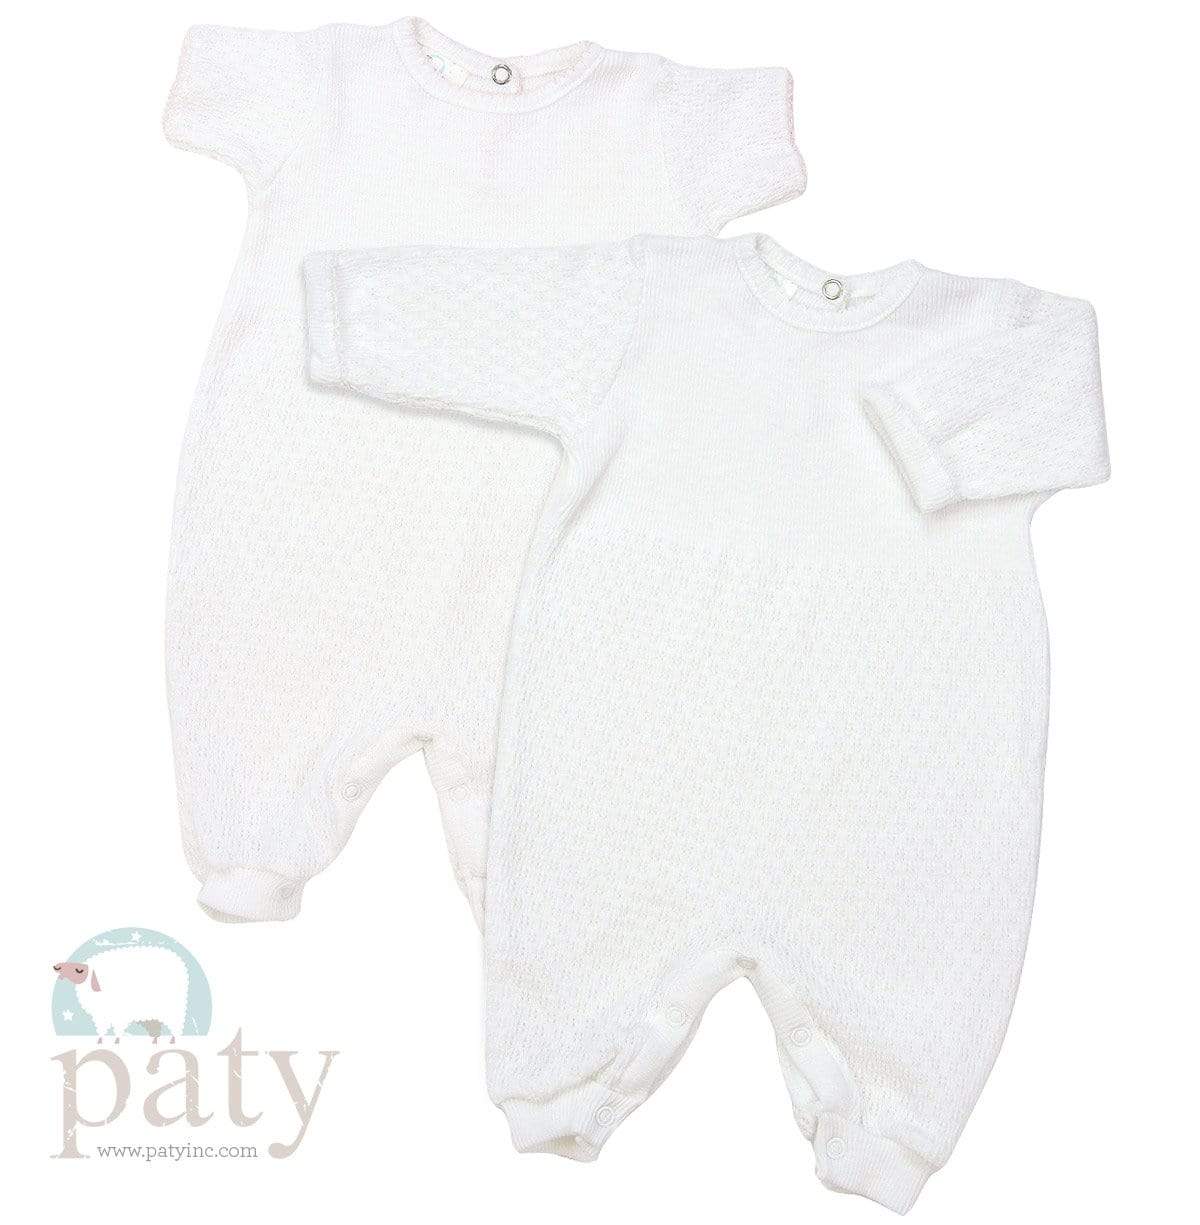 Paty Clothing - Infant Paty Short Sleeve Romper for Newborn - White with Blue Trim